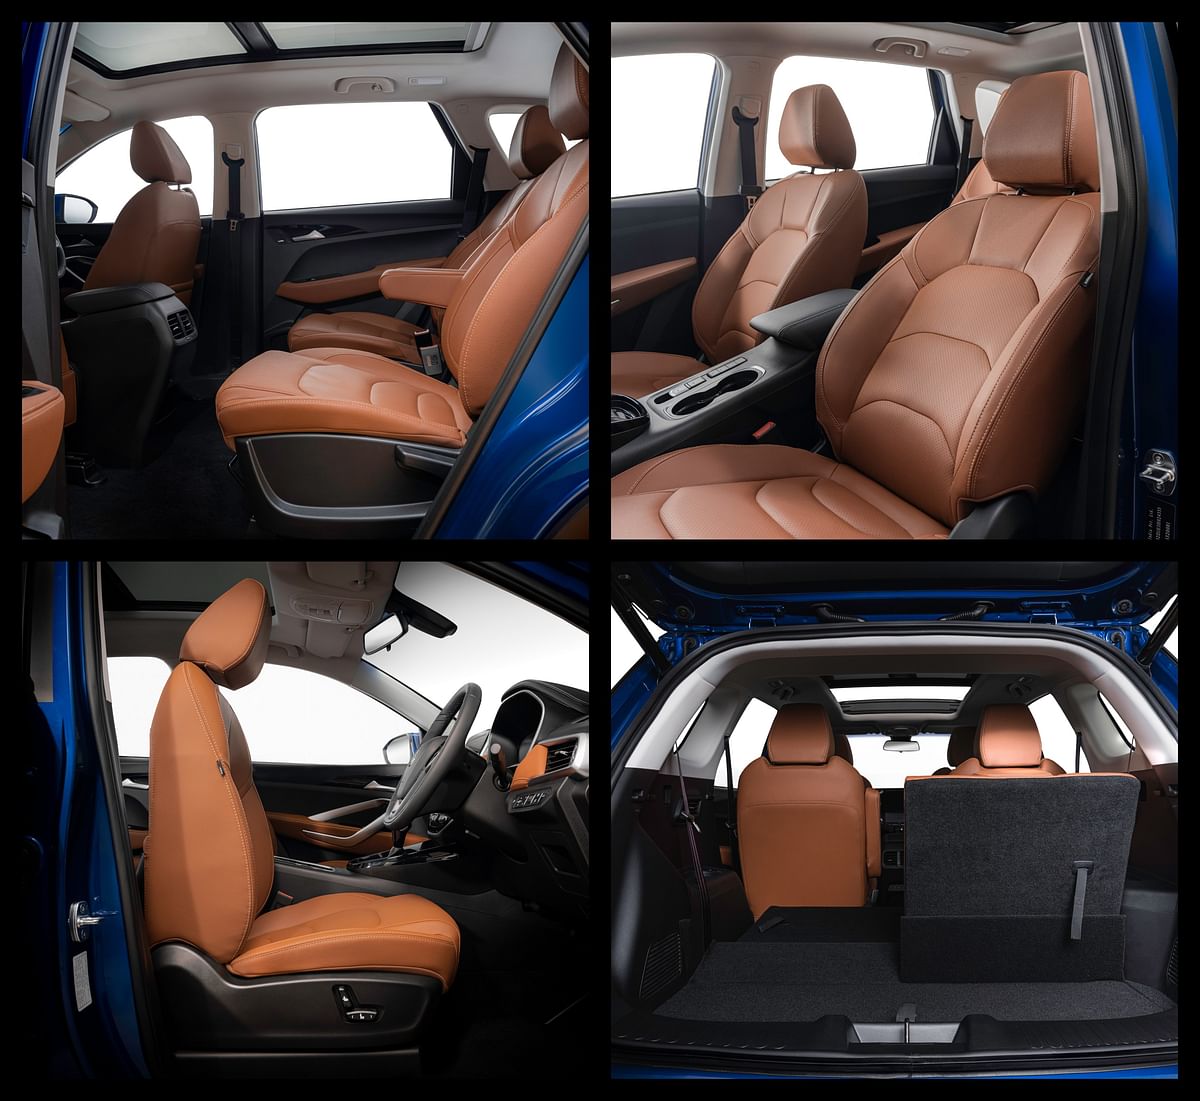 The model comes with four seats for adults and two seats for children with some design changes as compared with Hector which has five seats.